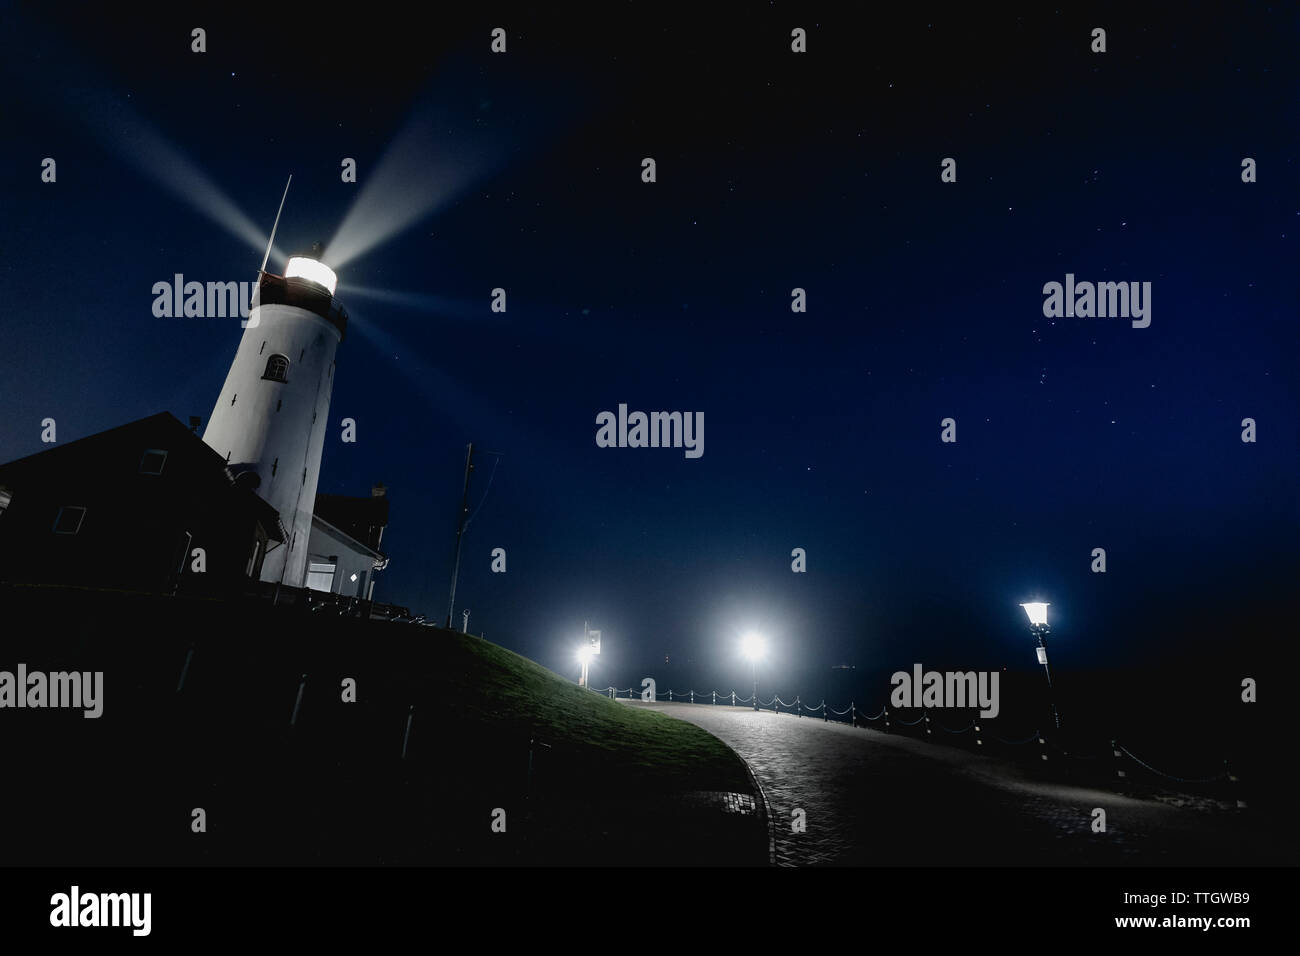 The lighthouse with with light stream on night sky with seeing stars. Stock Photo